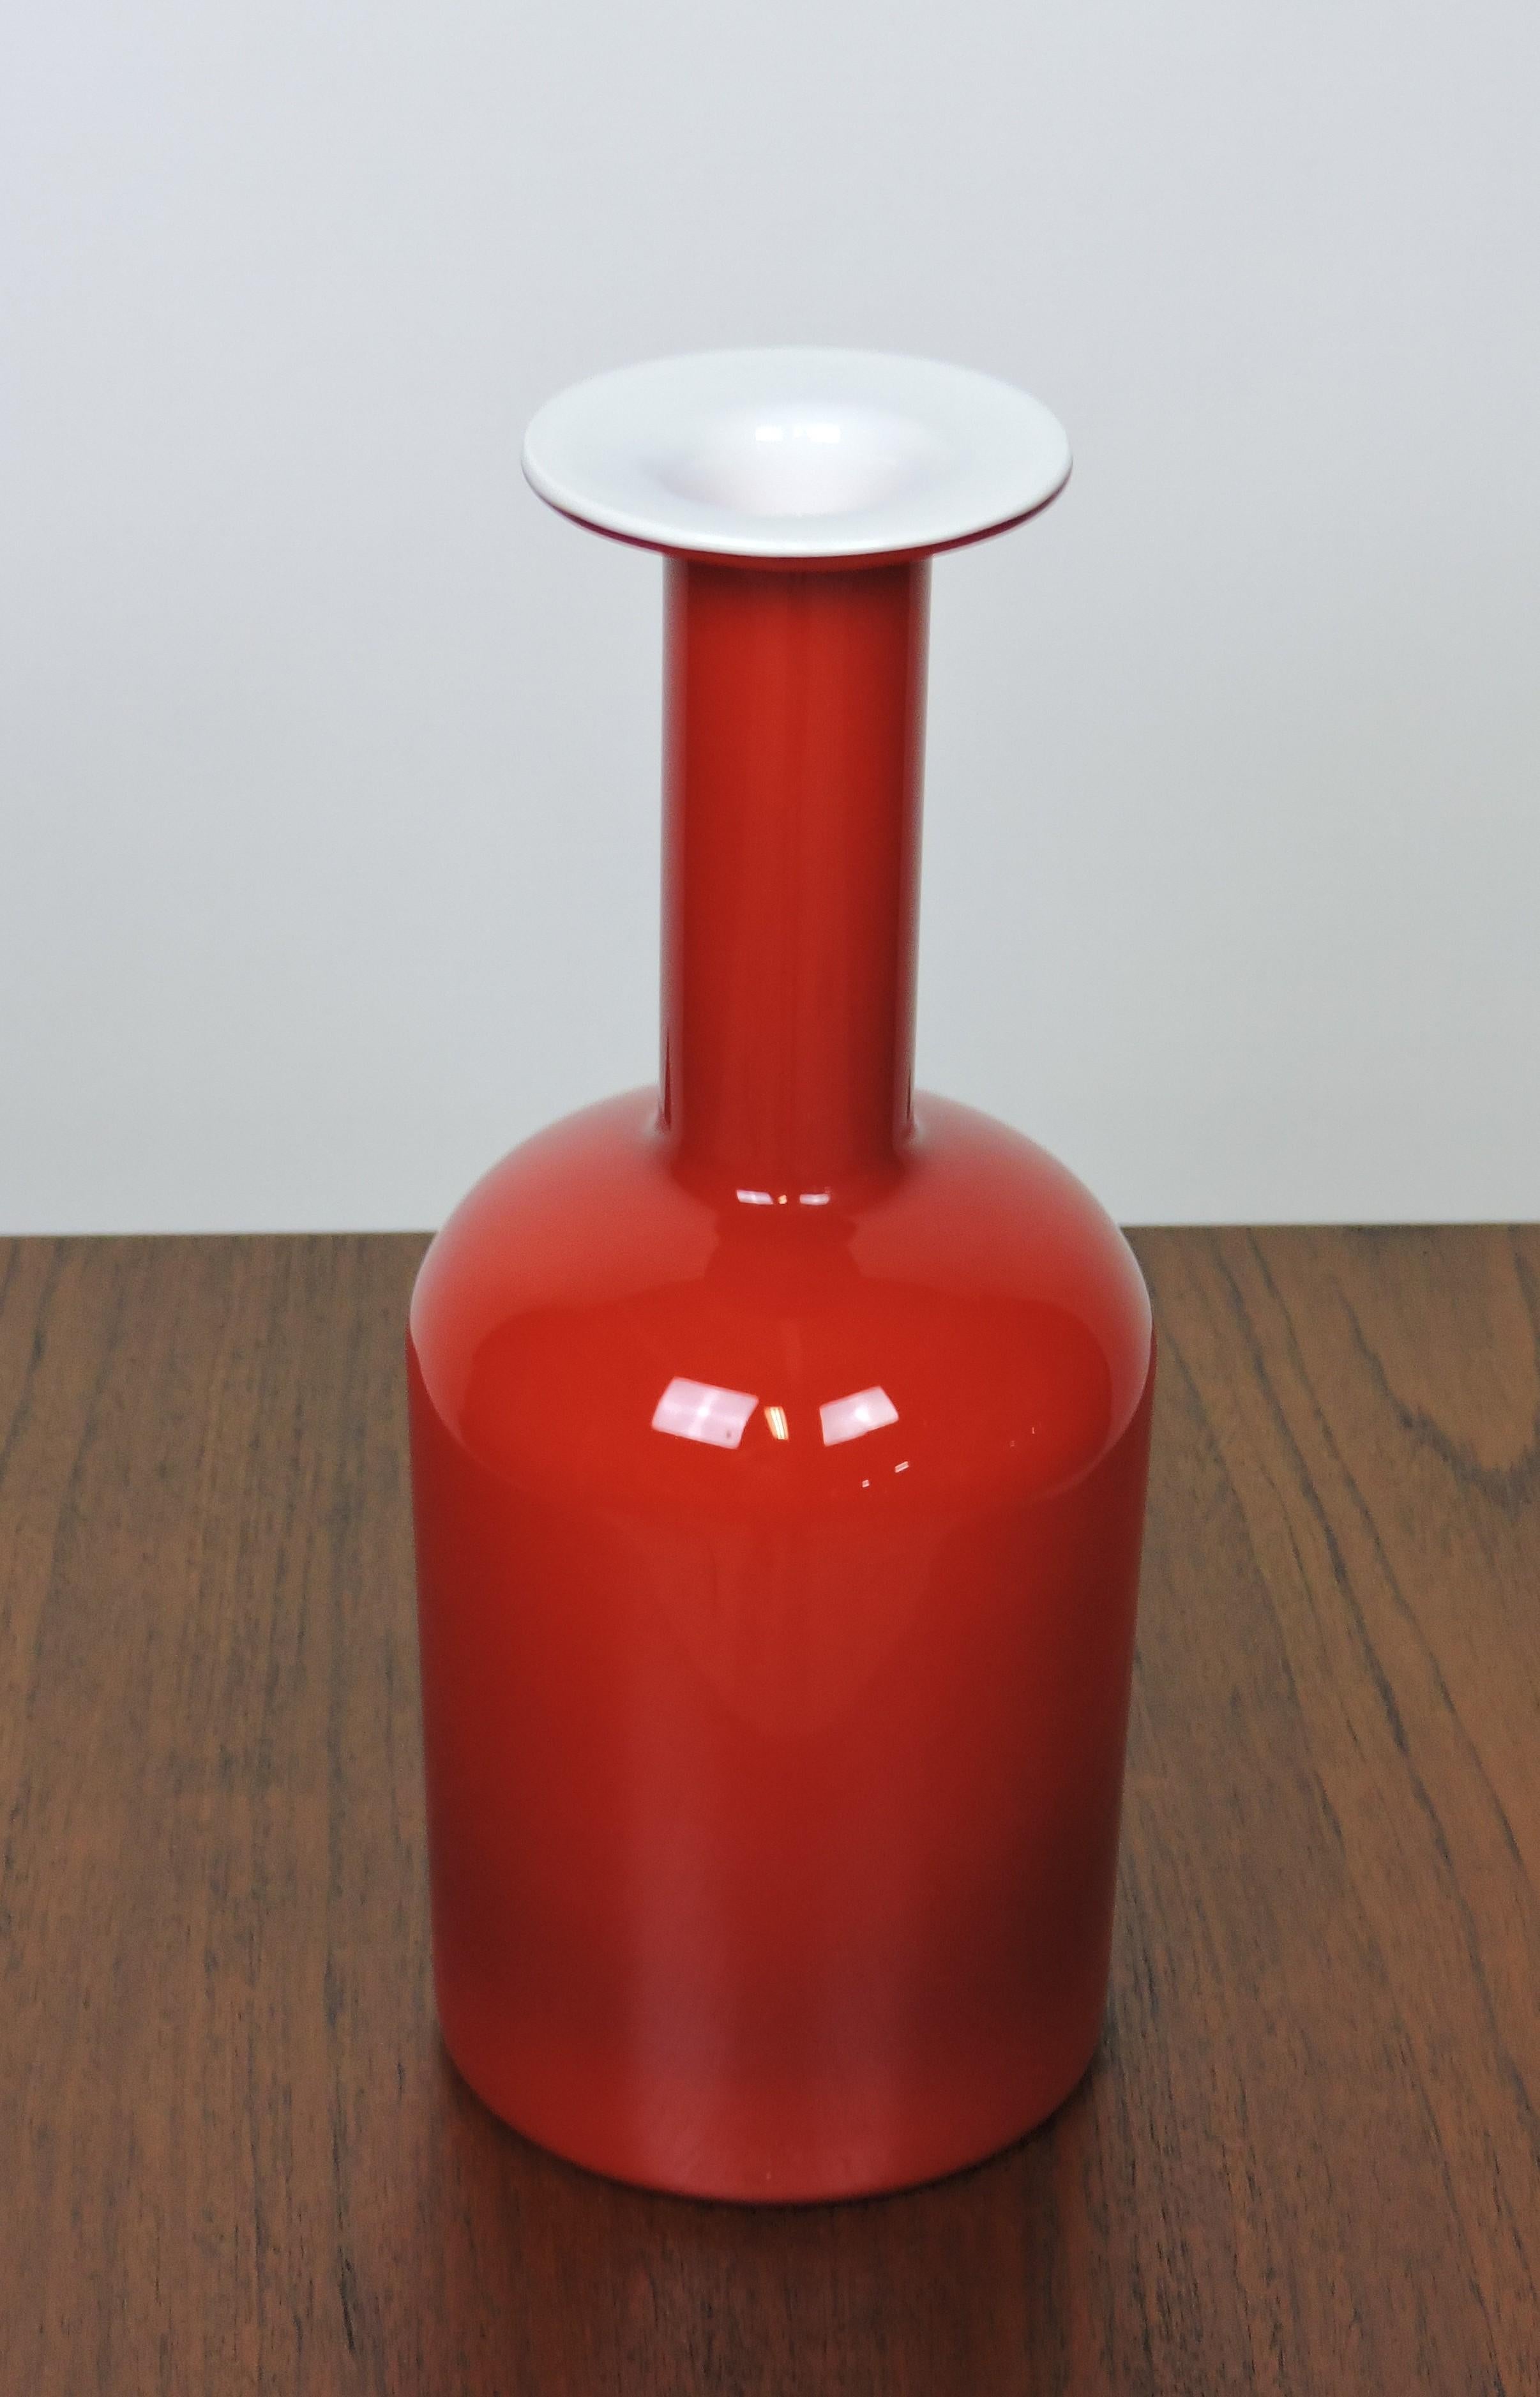 Large iconic cased glass Gulvvase designed by Otto Brauer and made in Denmark by Holmegaard. This vase is the medium size and has a red exterior with a white interior. The last picture shows it with a Swedish Argenta vase that is also for sale in a